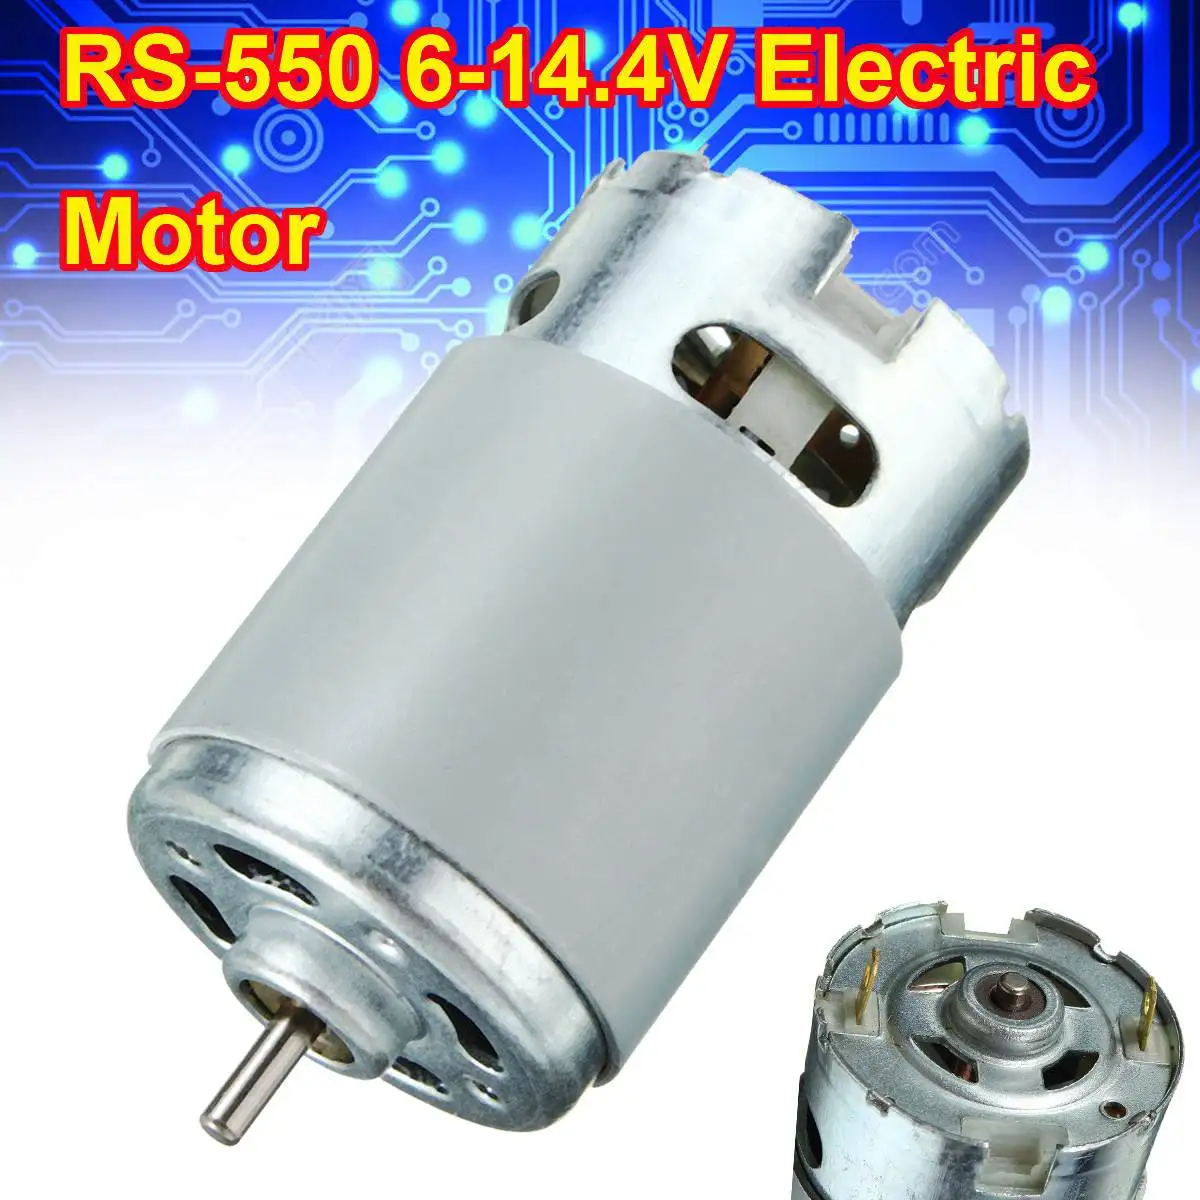 RS-550 Electric Motor 6-14.4V For Various Makita Bosch Cordless Screwdriver 